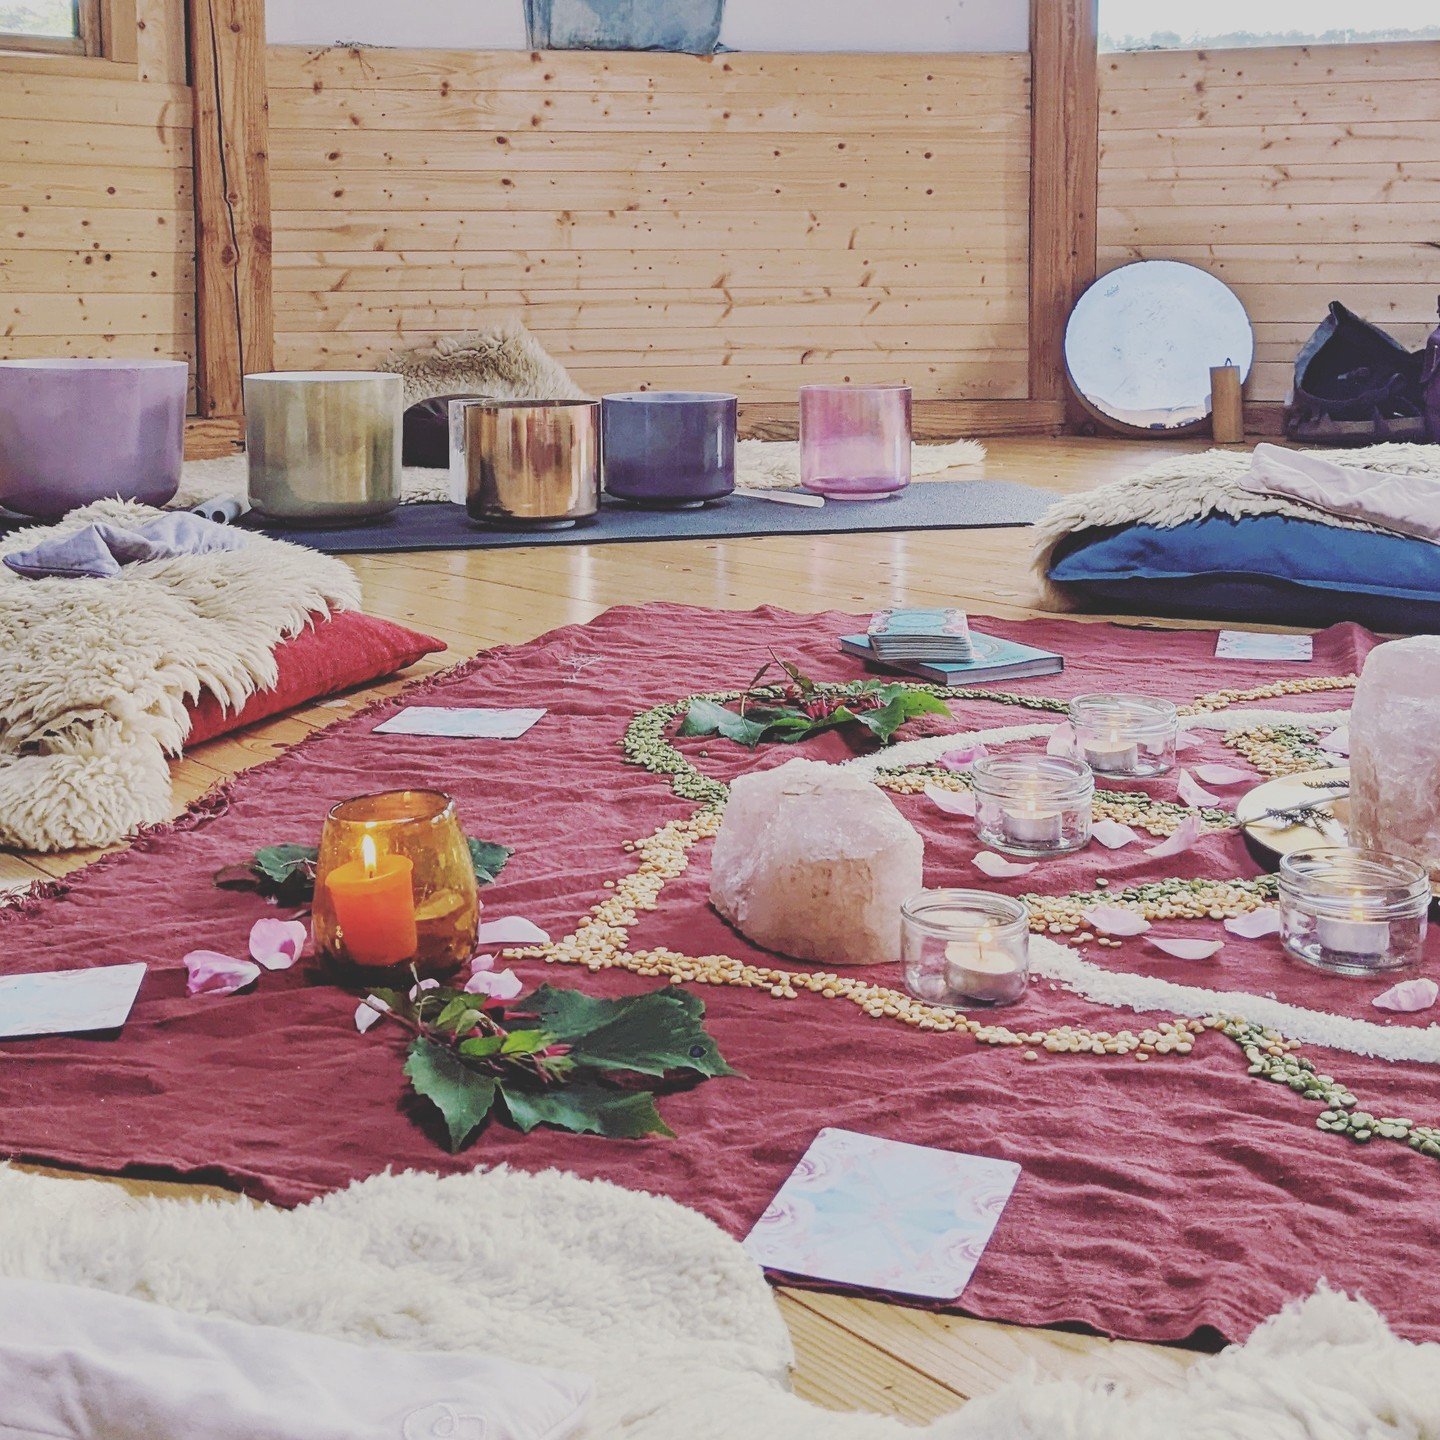 I had so much fun last week teaching Yoga and playing the Crystal Alchemy Bowls in this gorgeous yurt for a group of gorgeous women. Thanks so much @earthymaama for inviting me to join and contribute to your friends blessingway celebrations.

Next cl